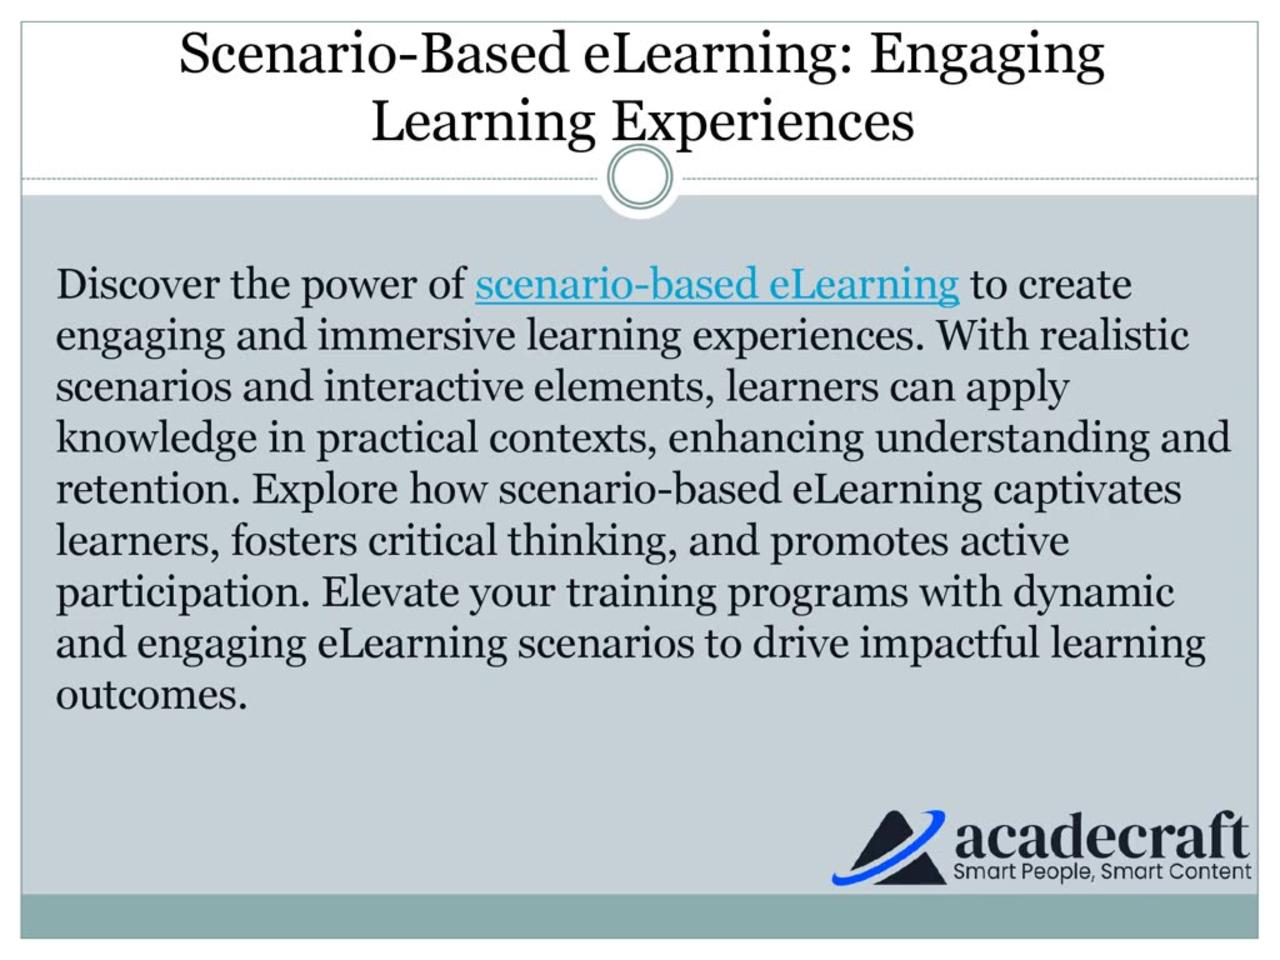 Scenario-Based eLearning: Engaging Learning Experiences